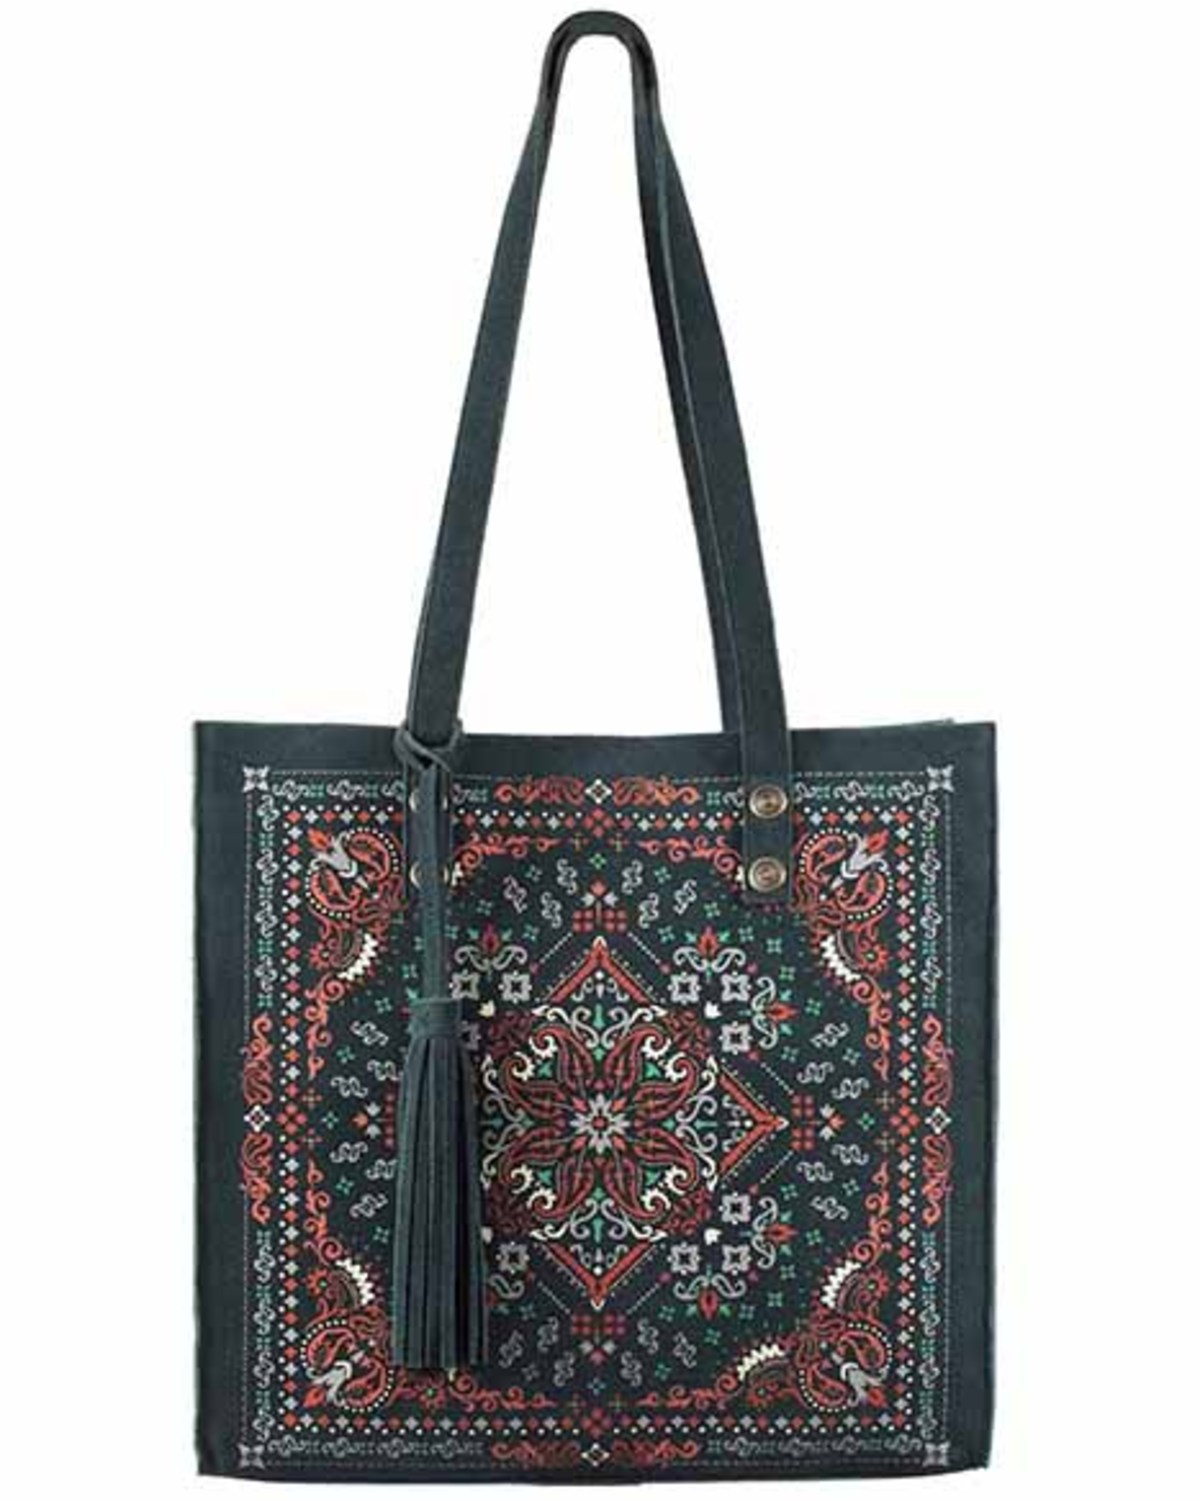 Scully Women's Printed Leather Tote